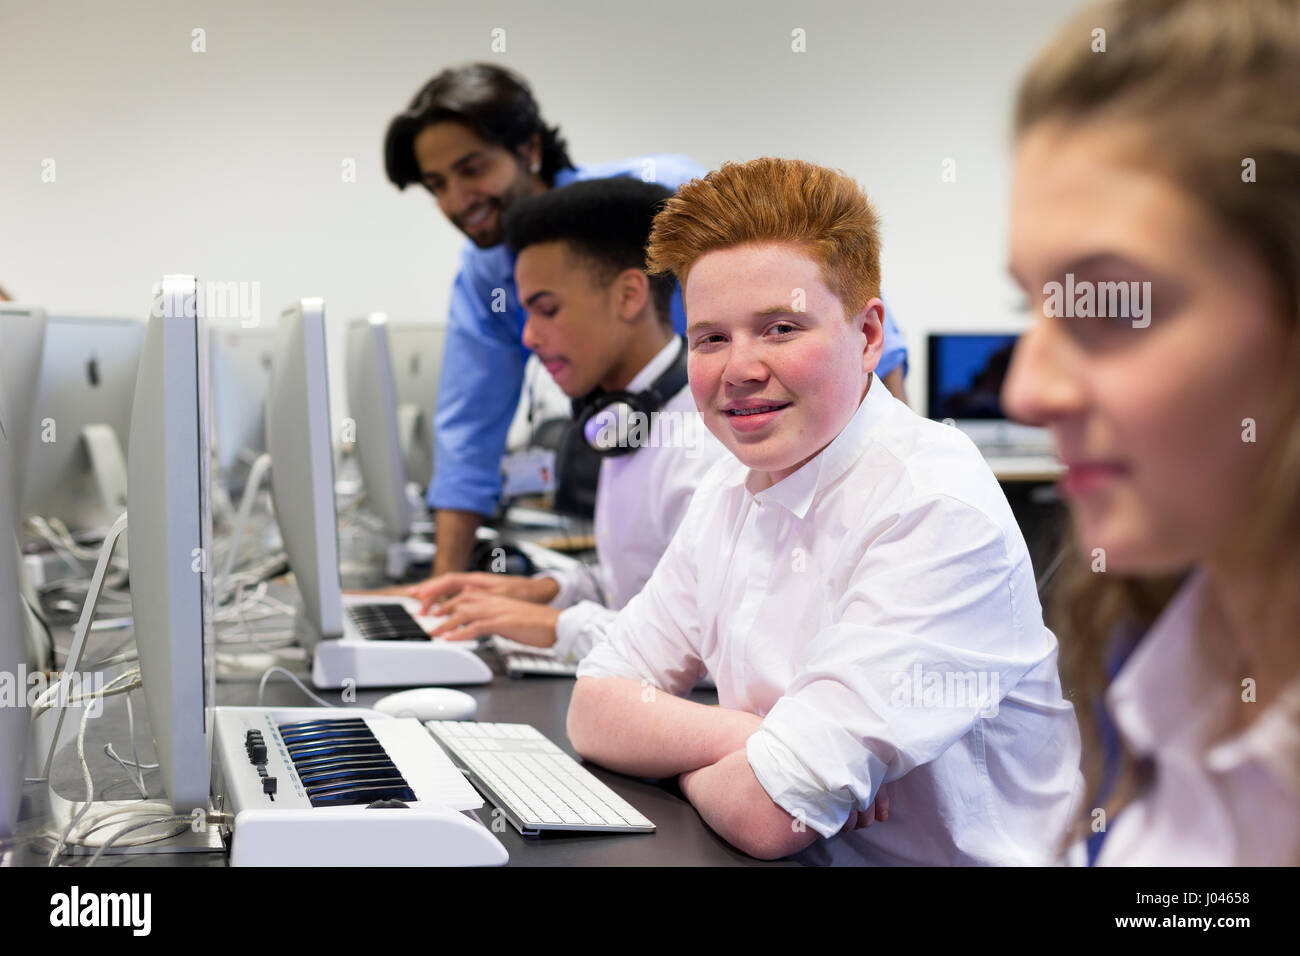 Students using computers in a school lesson. One student is smiling at the camera. There is a teacher helping another student in the background. Stock Photo